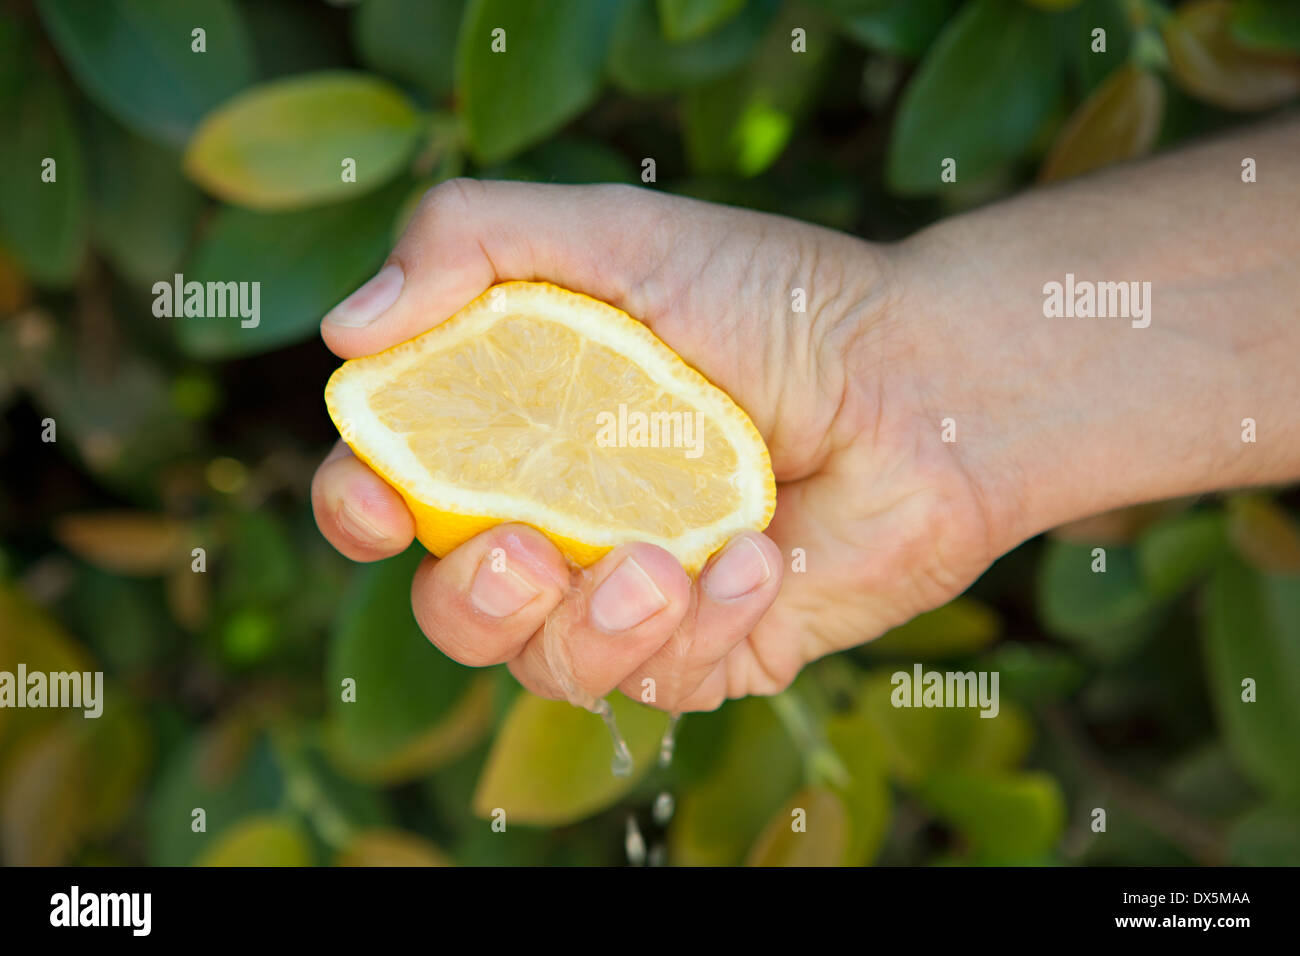 Man's hand squeezing juice from cross-section of yellow lemon, close up, high angle view Stock Photo